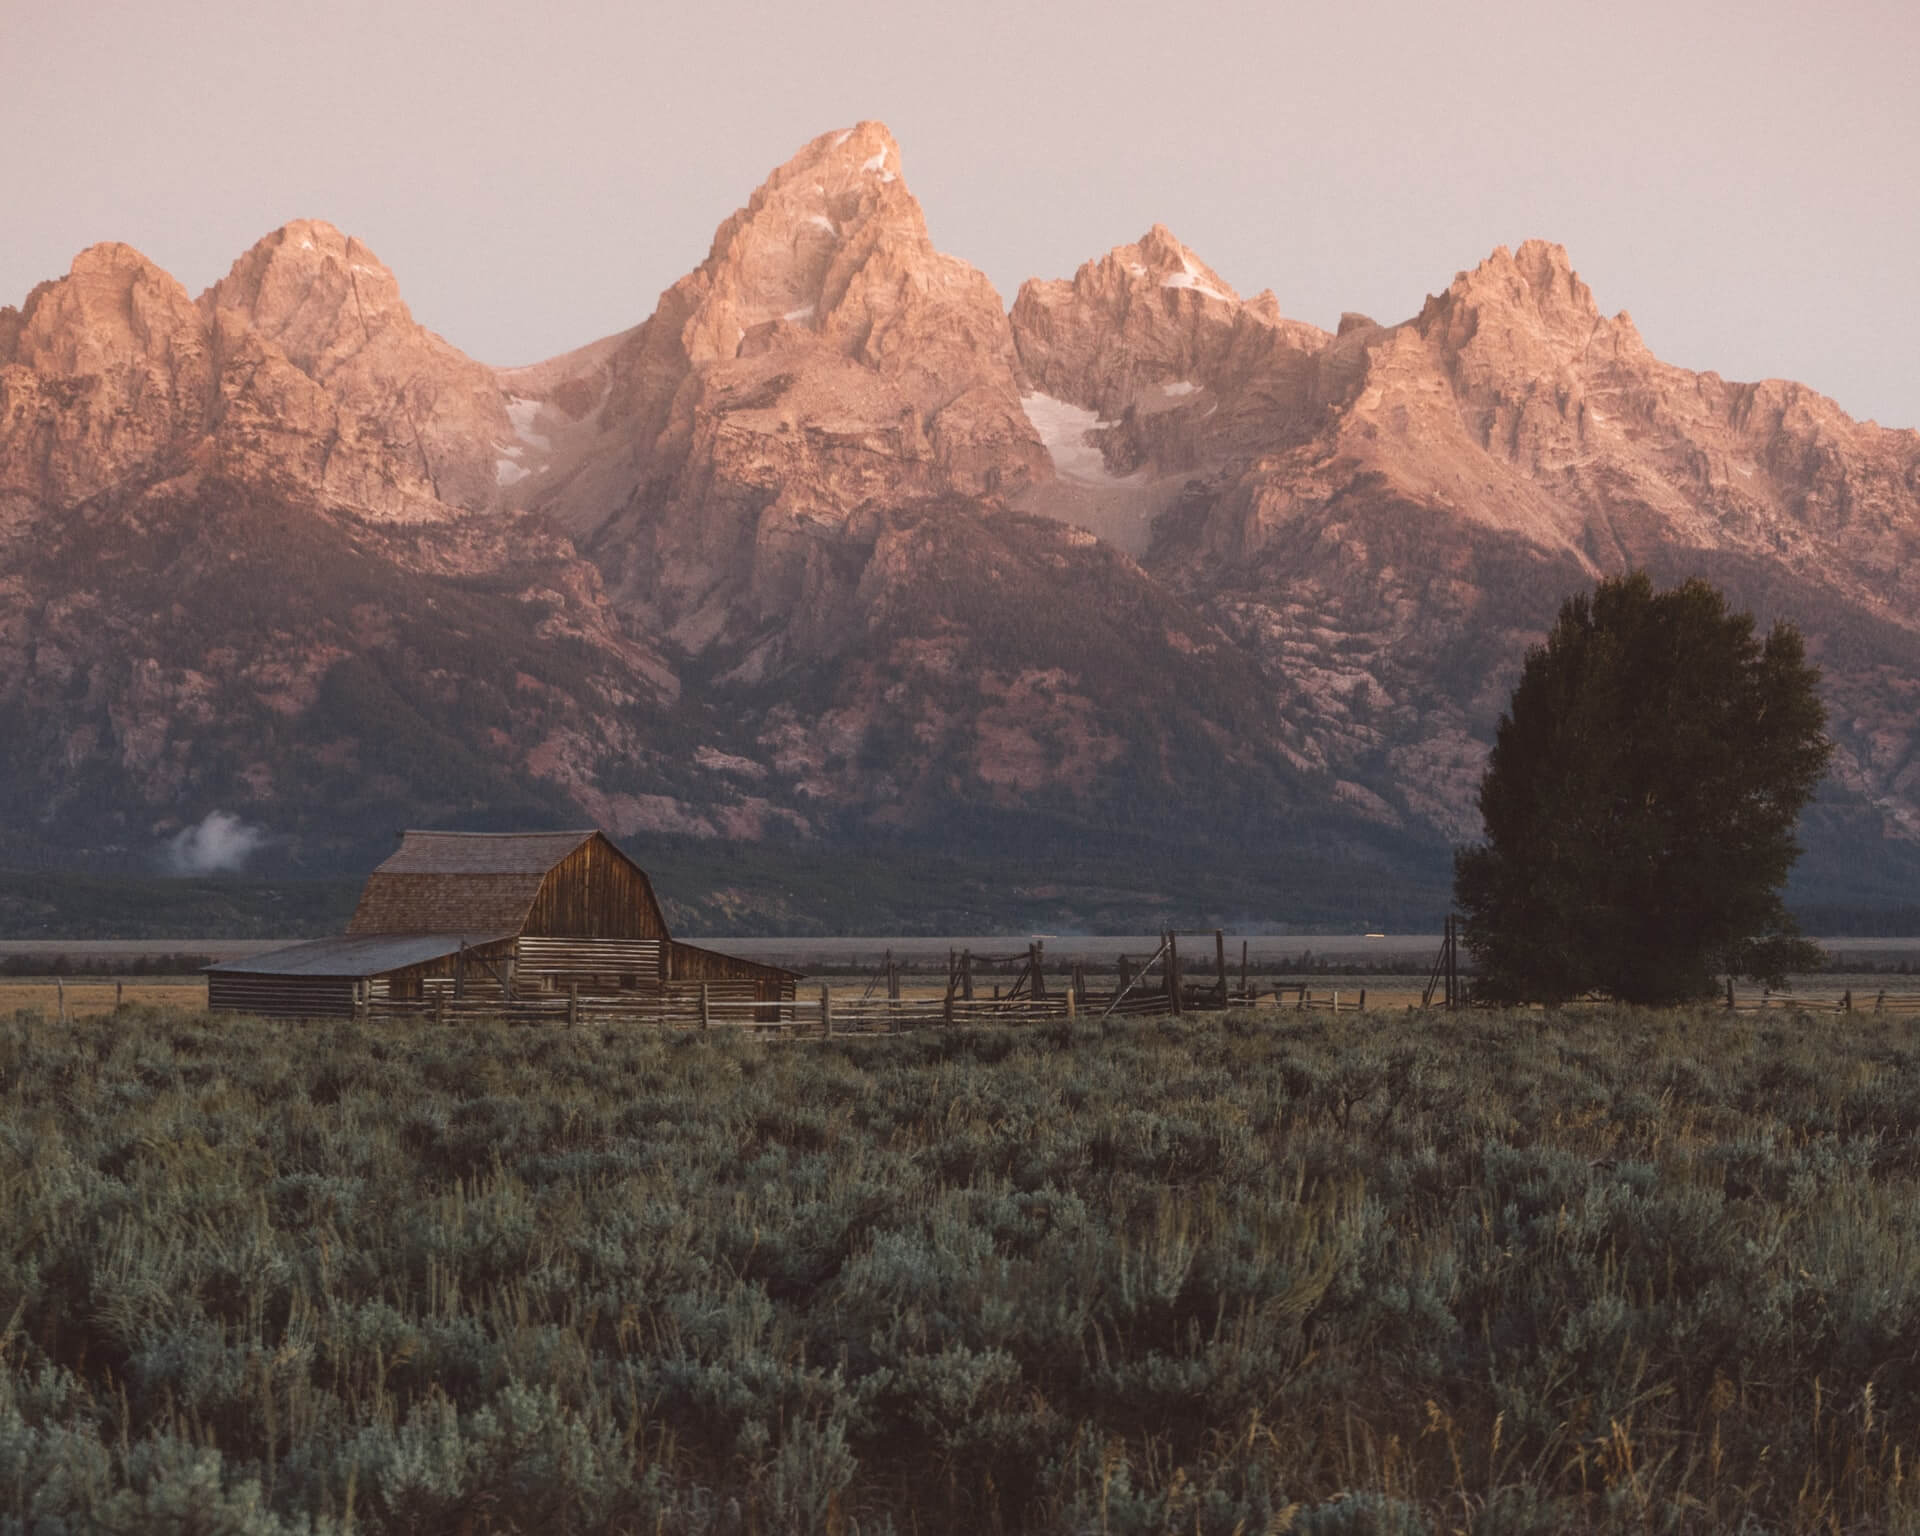 How much does cost to enter Grand Teton National Park?